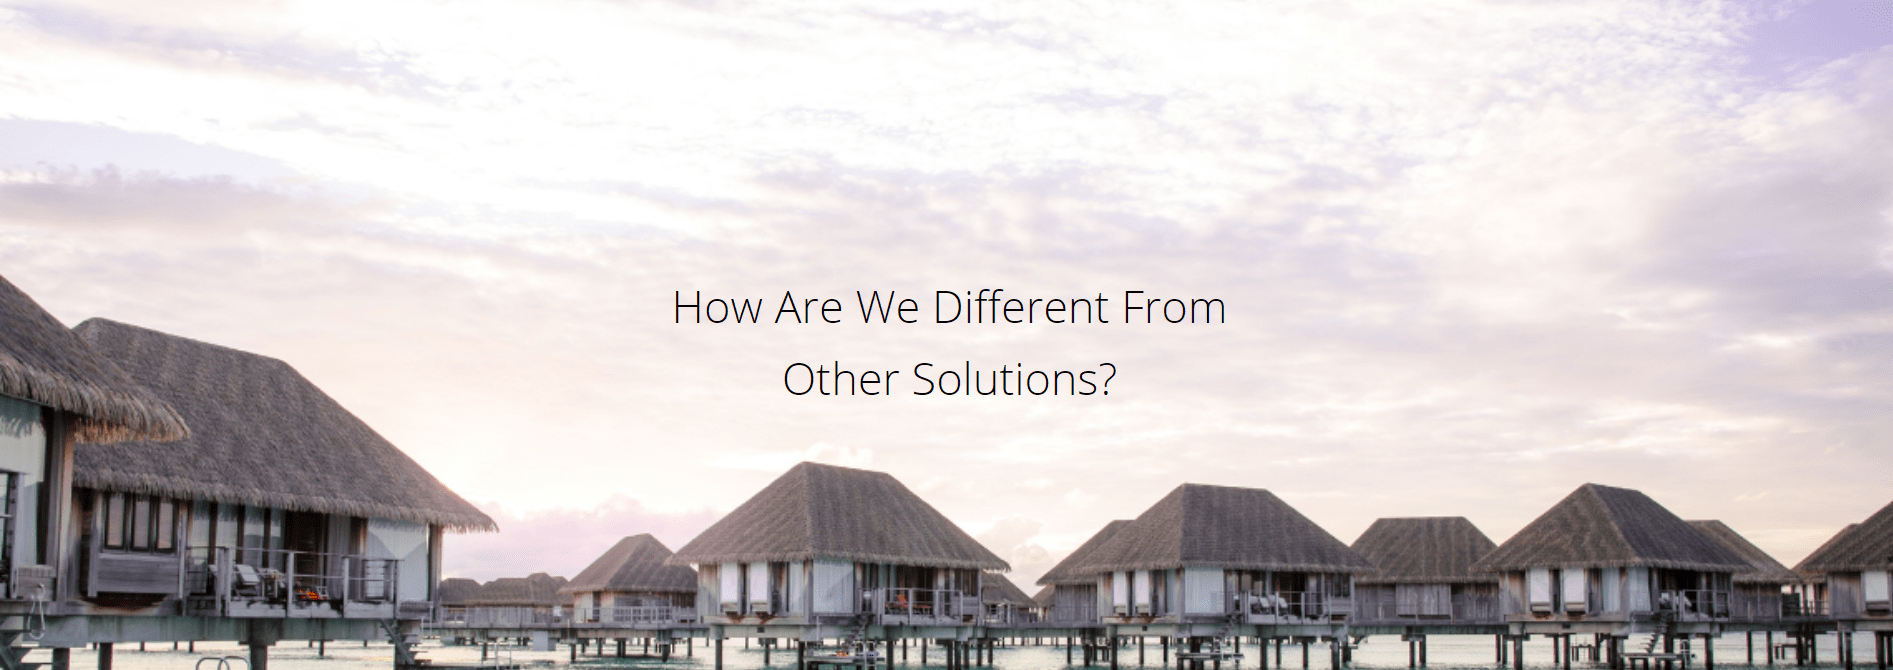 How Are We Different From Other Solutions?